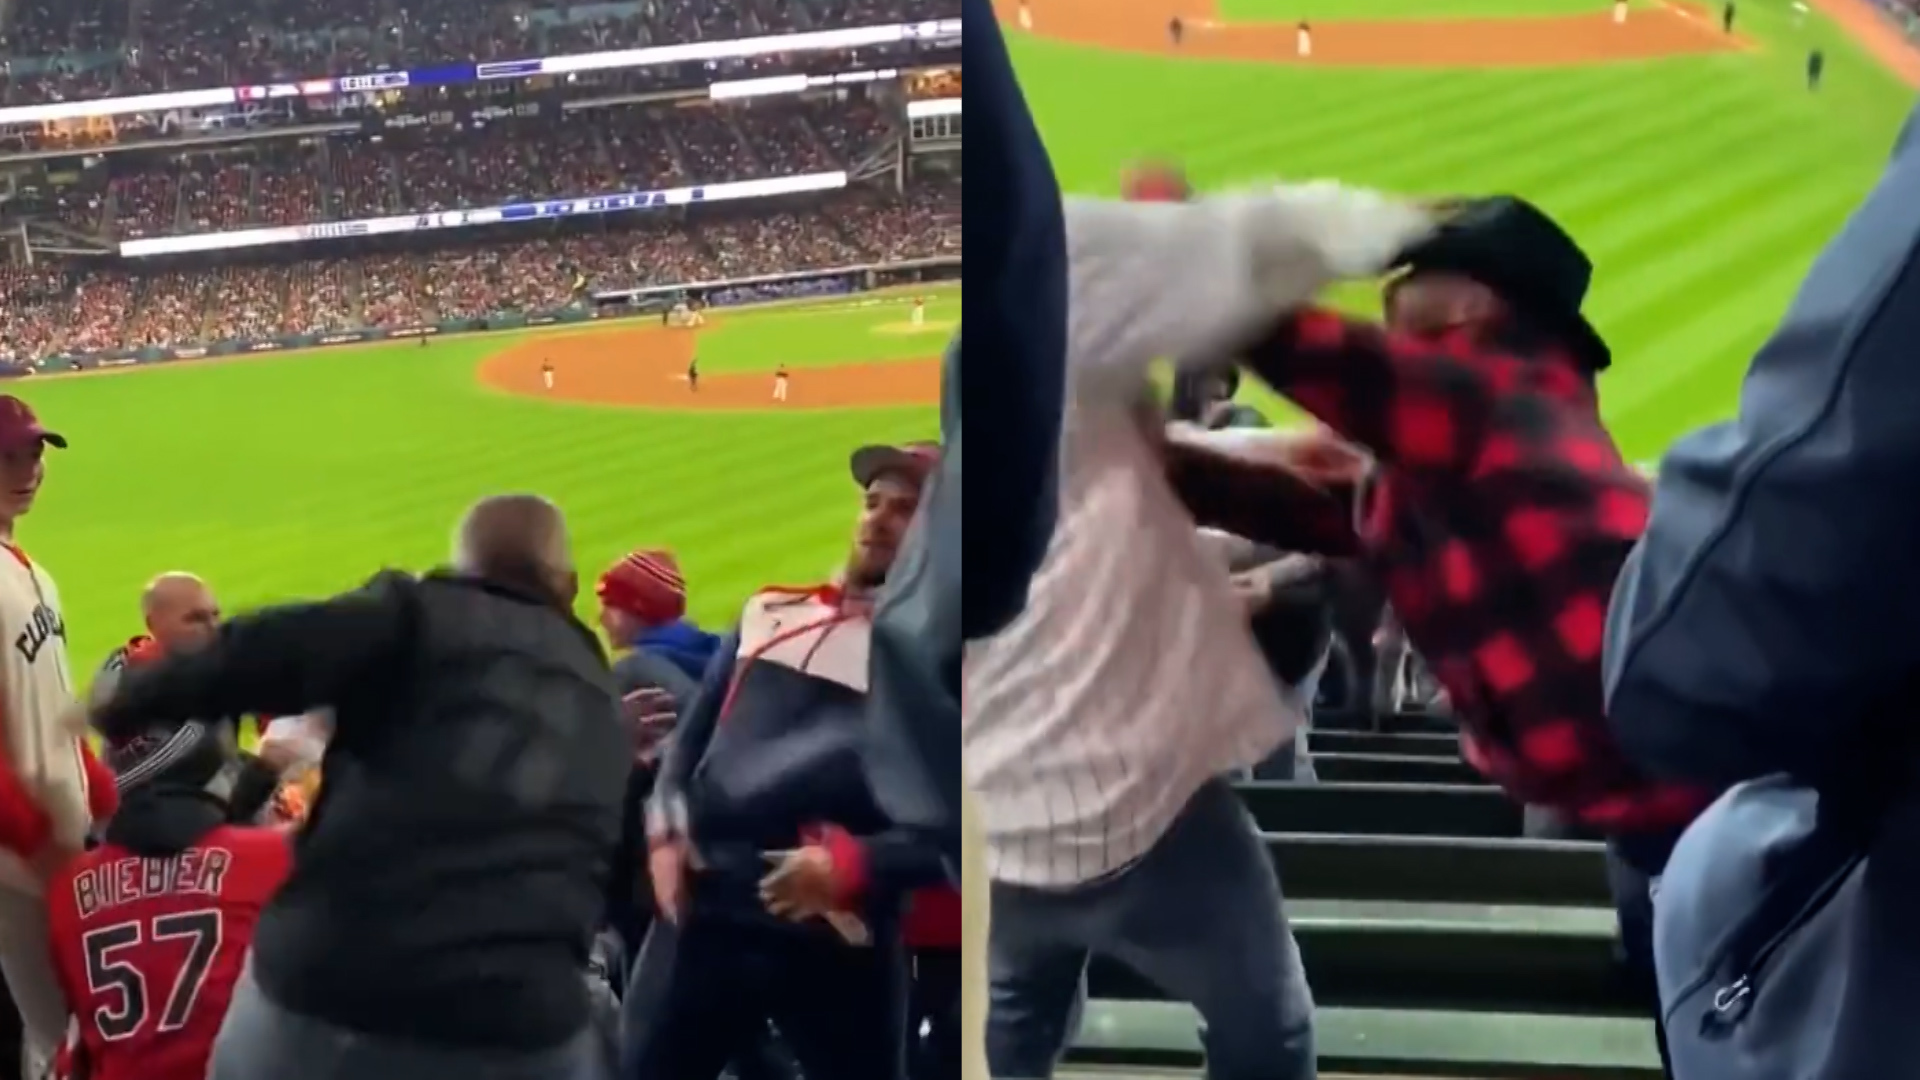 Hilarious punch up during New York Yankees vs Cleveland Guardians Baseball game